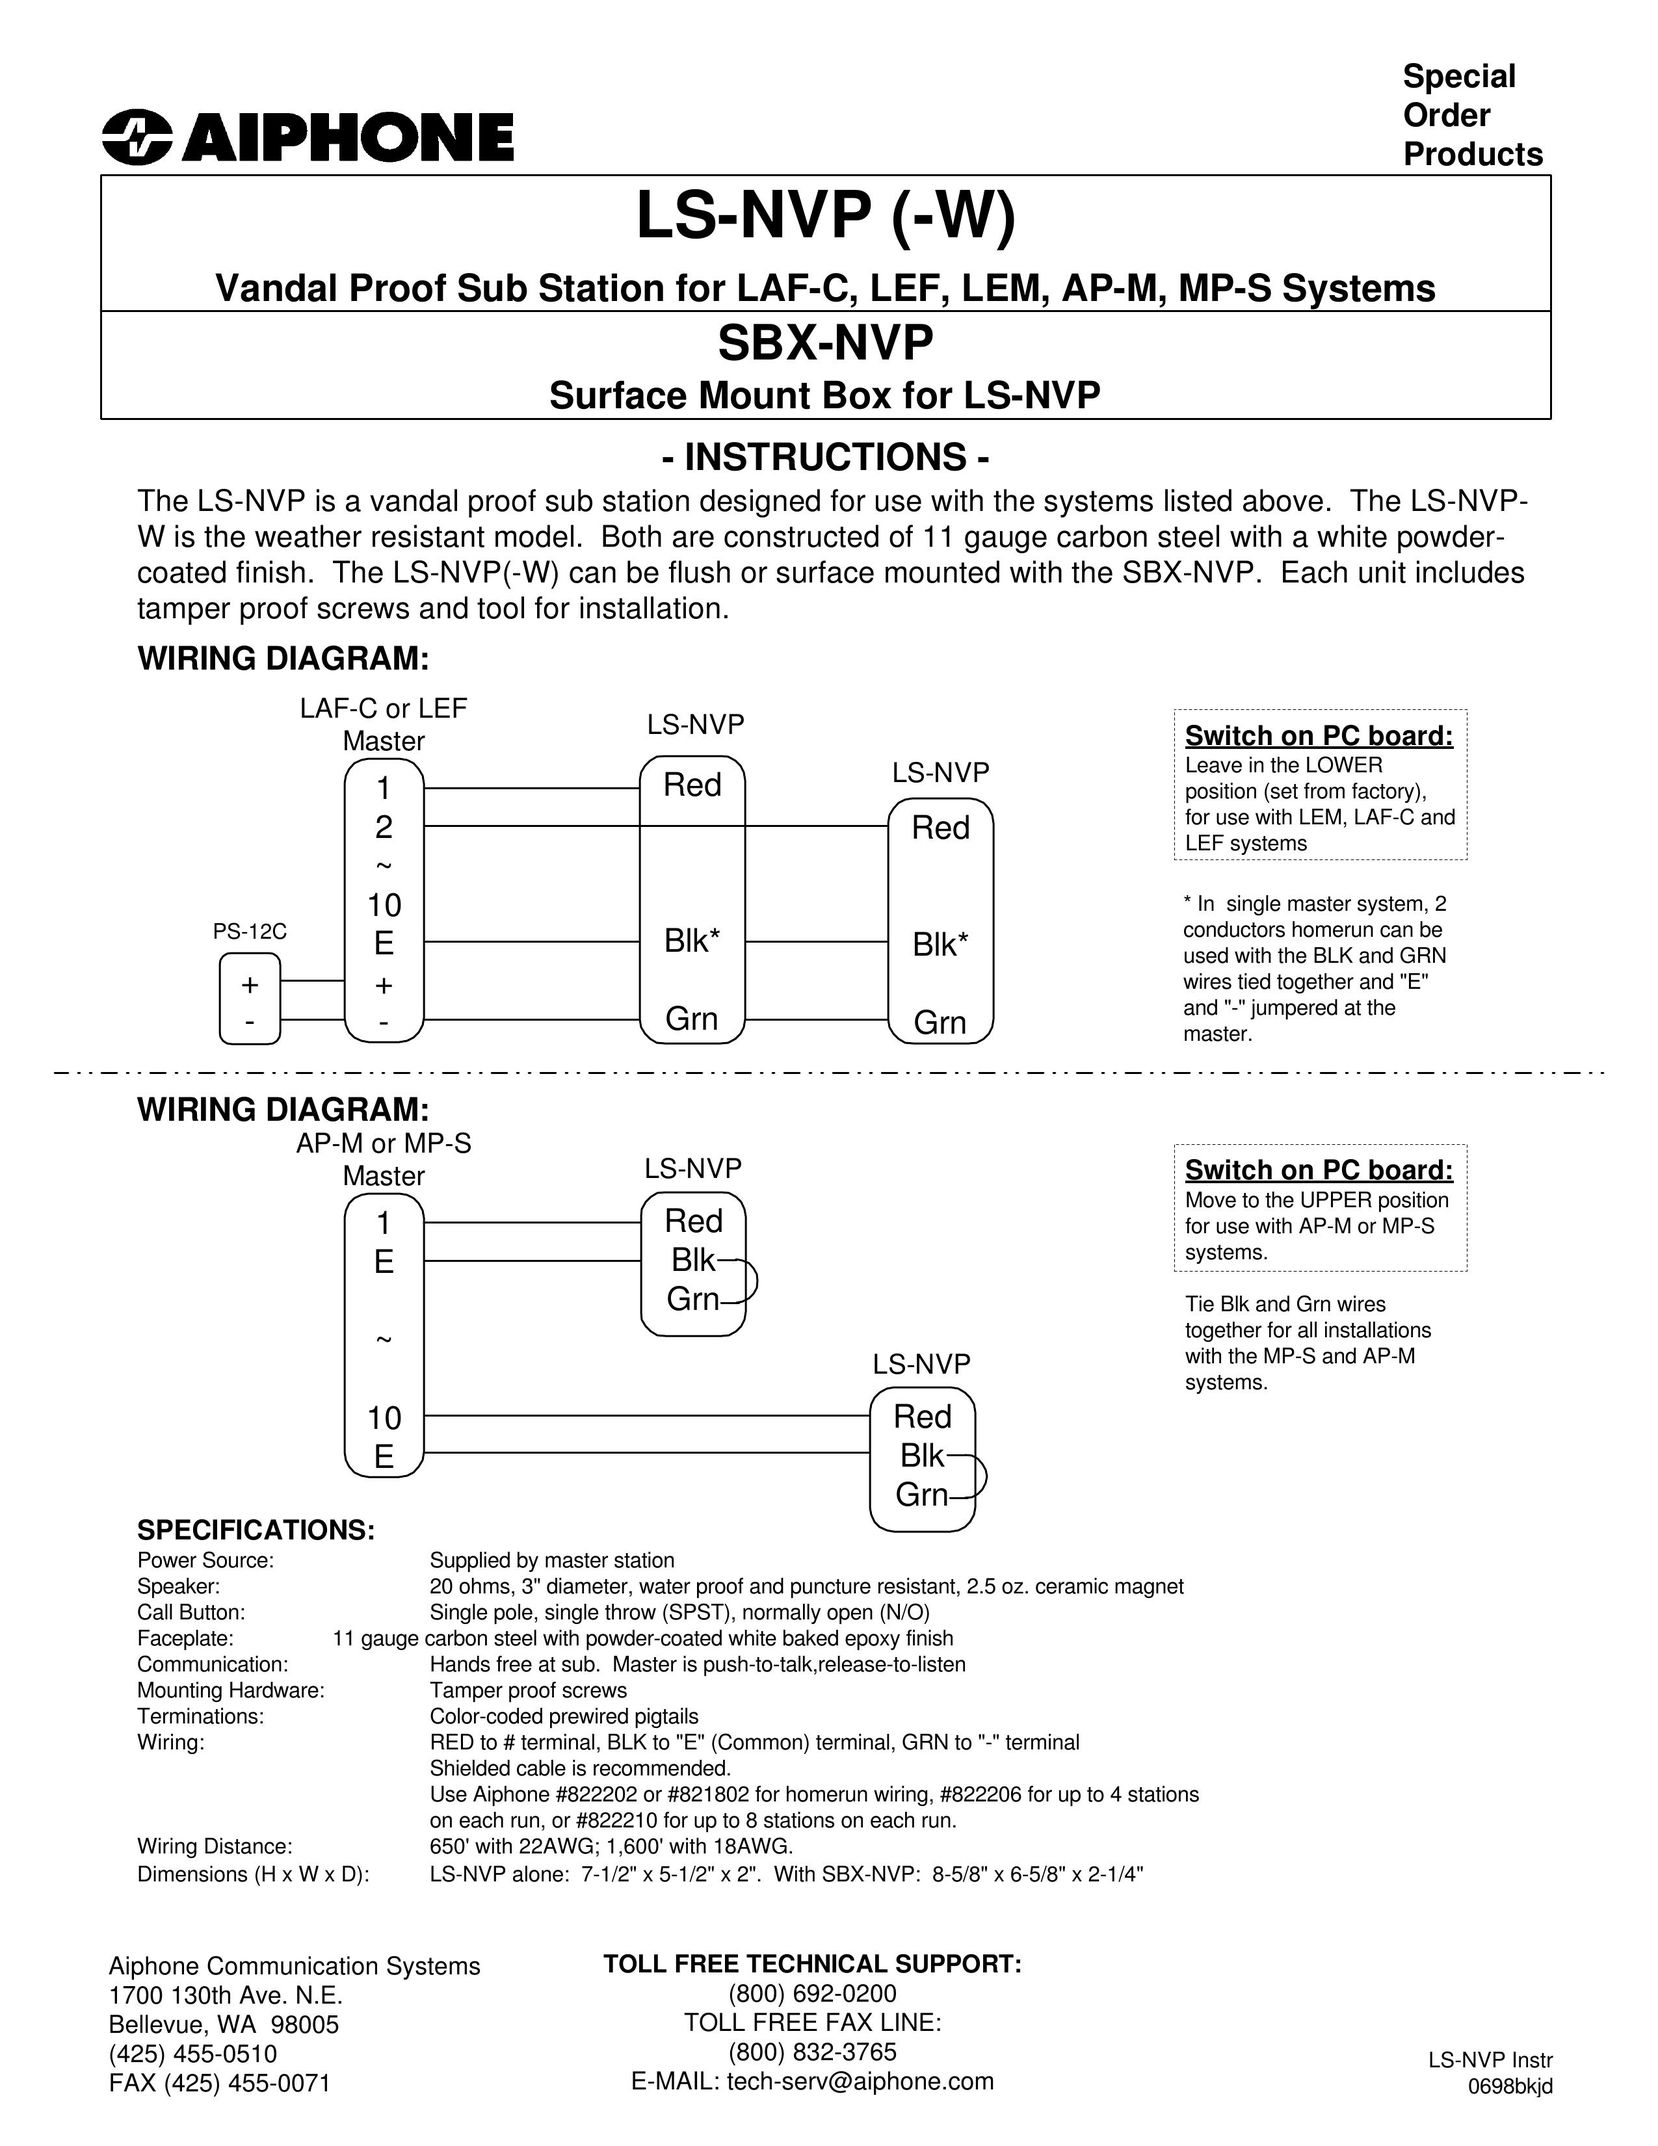 Aiphone LAF-C Home Security System User Manual